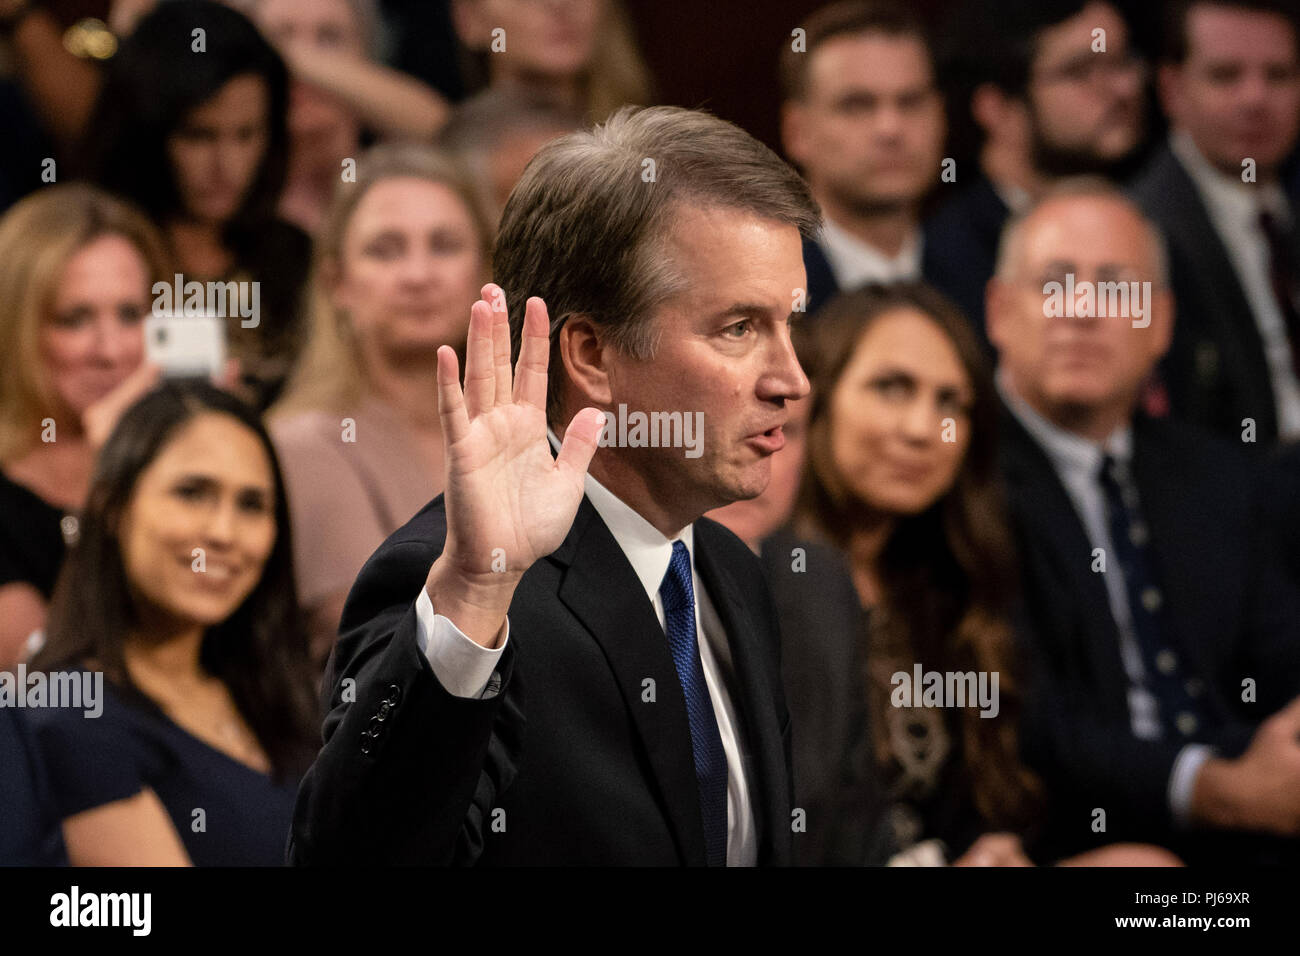 Washington, DC, USA. 4th Sep, 2018. U.S. Supreme Court Associate Justice nominee Brett Kavanaugh is sworn in during his confirmation hearing before the Senate Judiciary Committee in the Hart Senate Office Building in Washington, DC on Sept 4, 2018. Credit: Ken Cedeno/ZUMA Wire/Alamy Live News Stock Photo